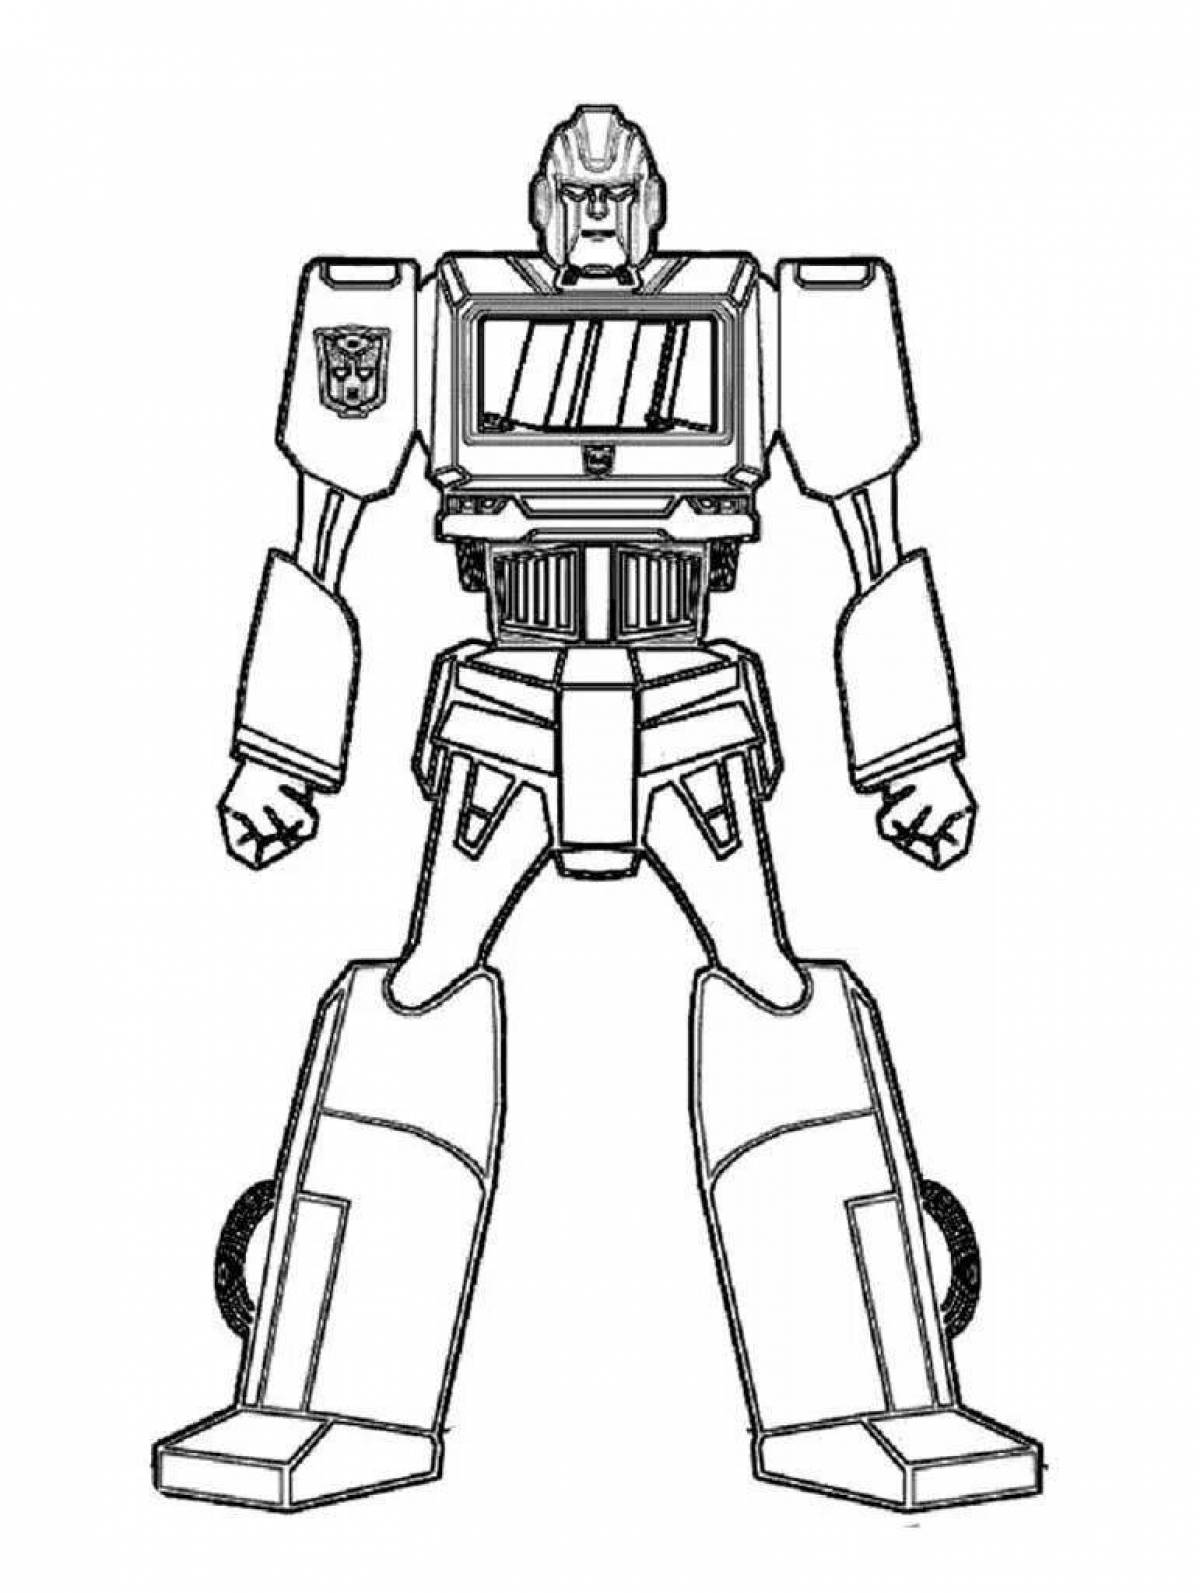 Funny transformers coloring pages for kids 6-7 years old